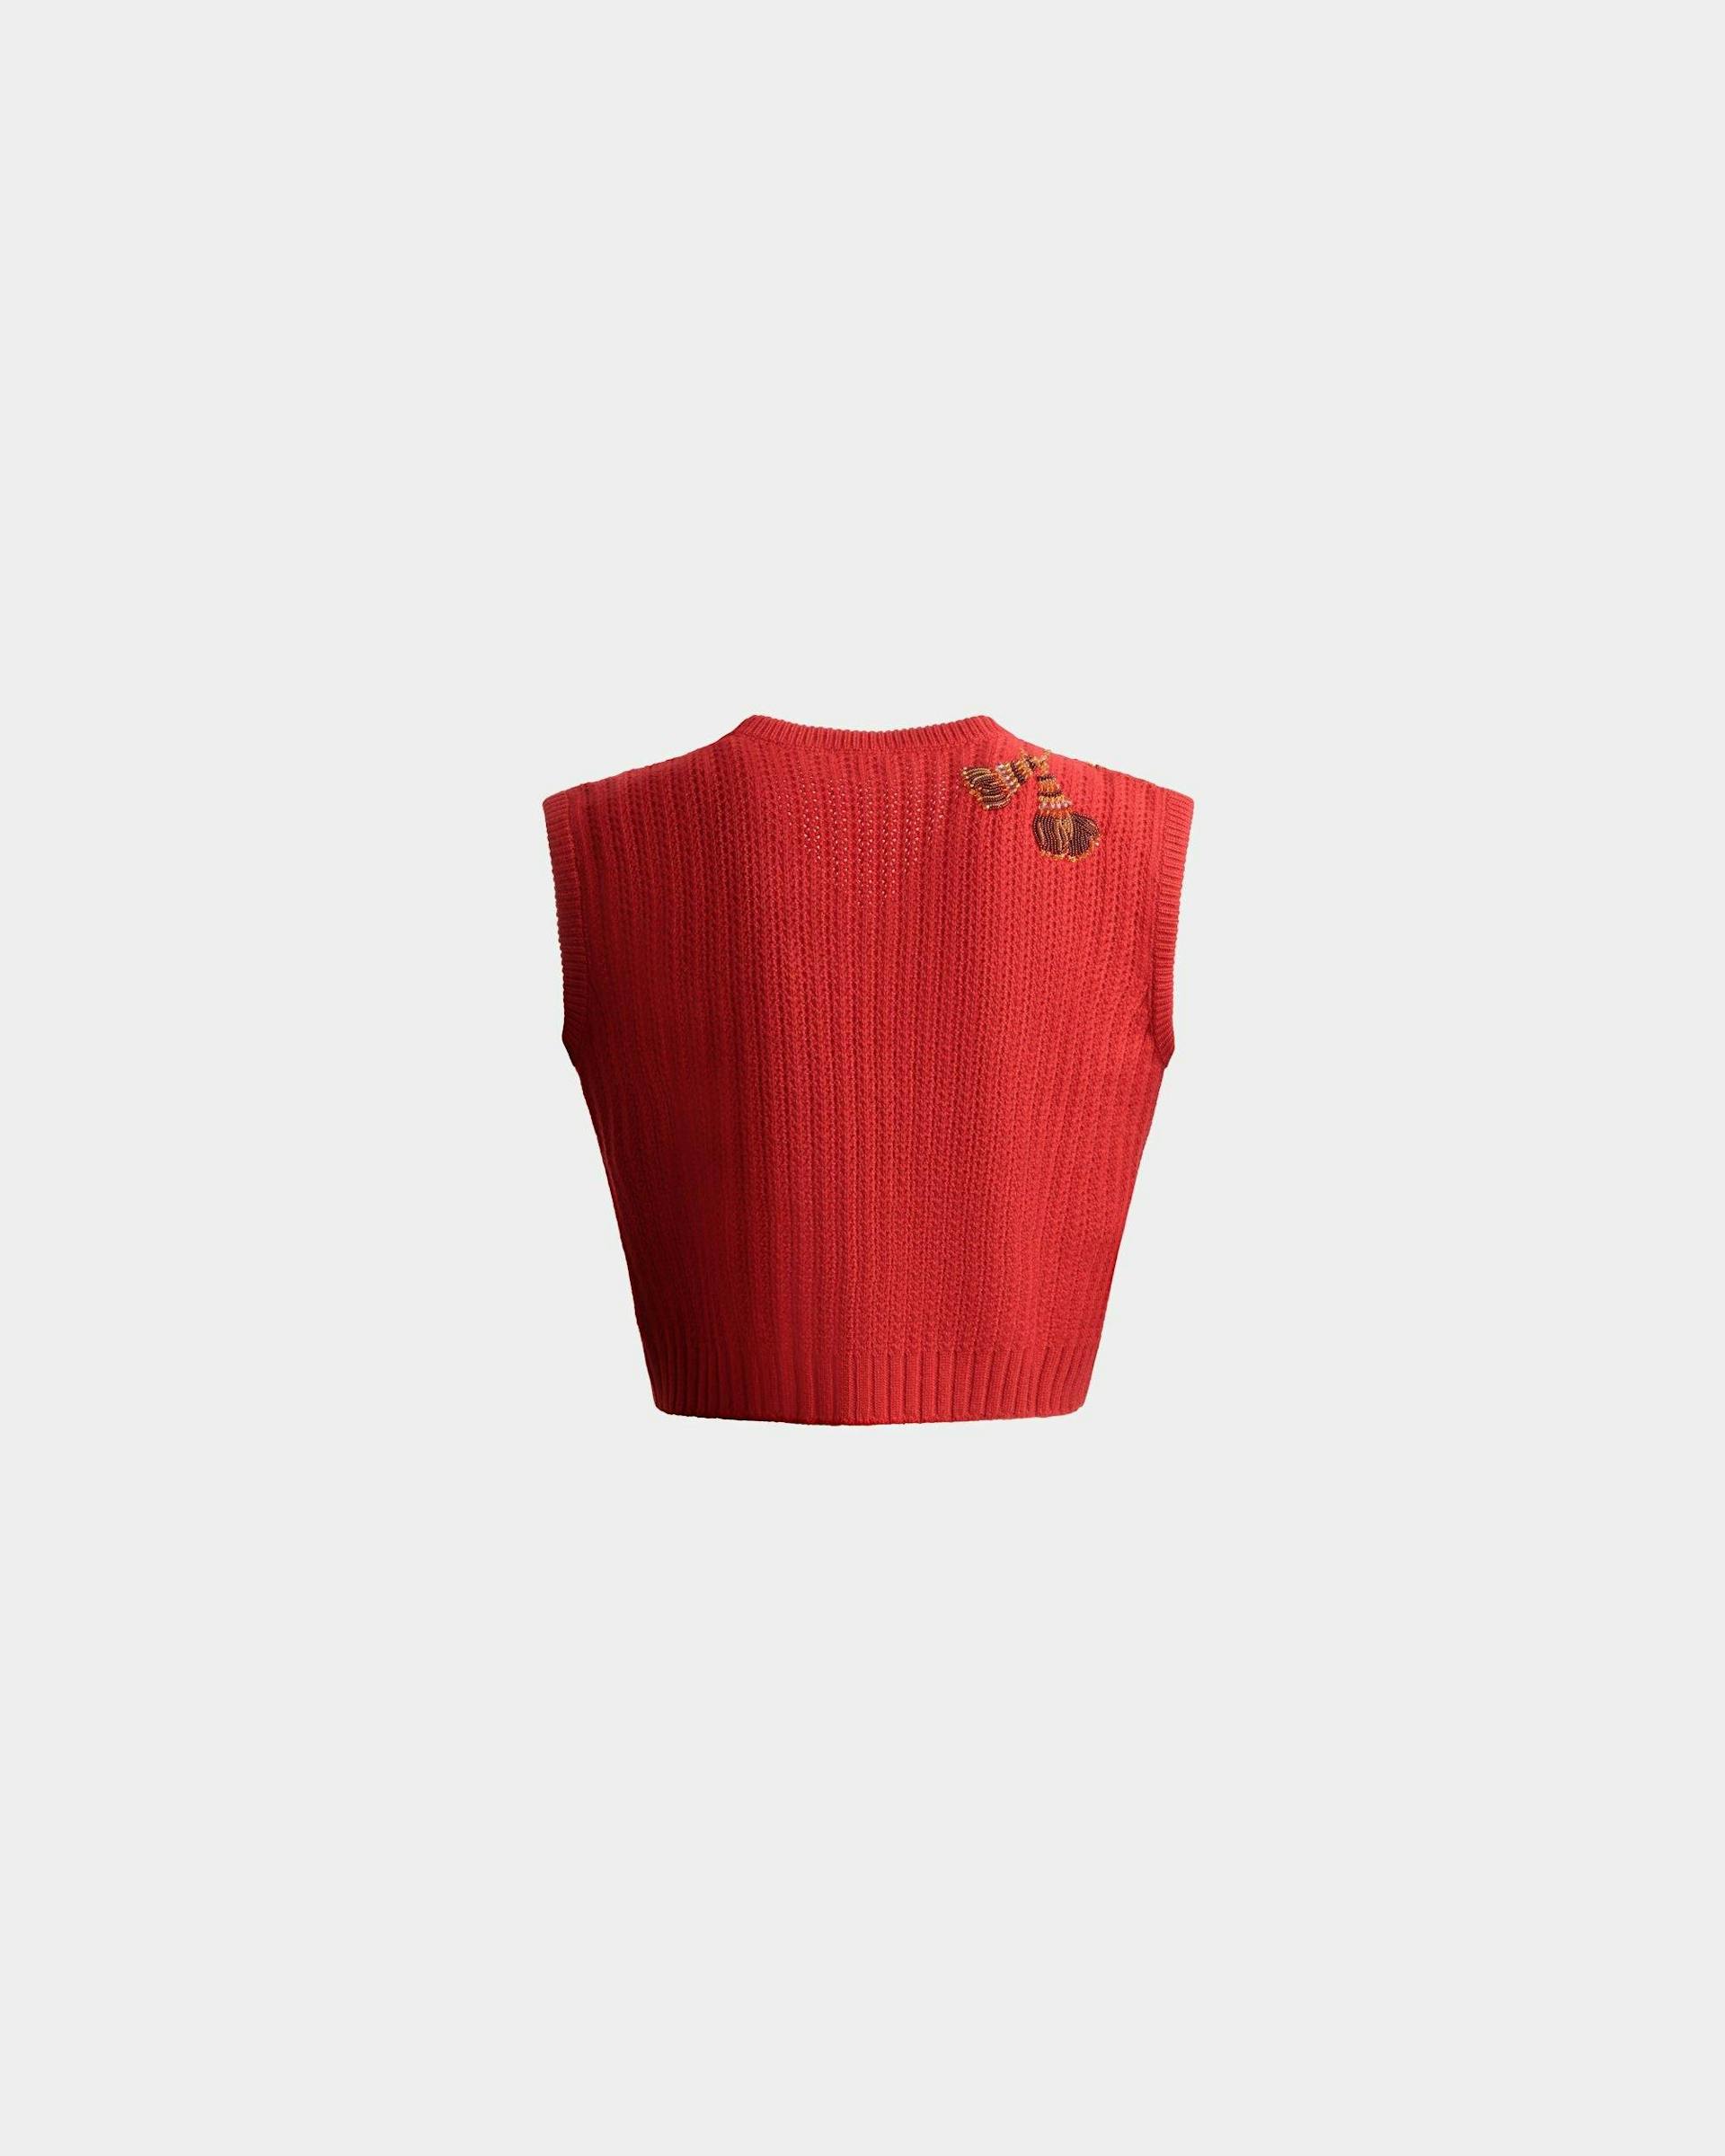 Women's Vest In Red Cashmere | Bally | Still Life Back